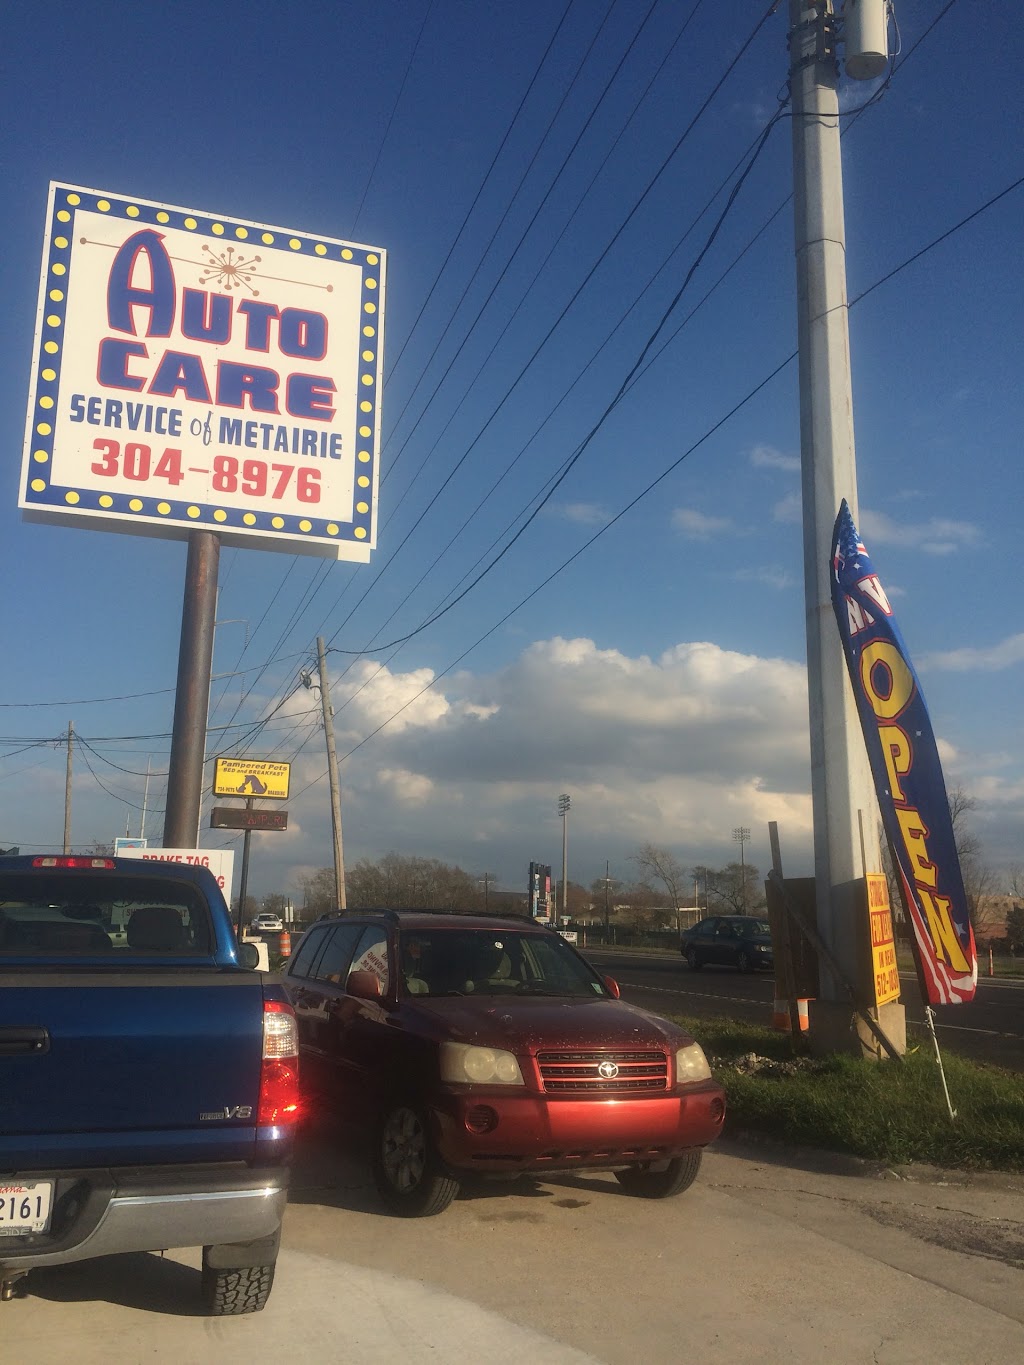 Auto Care Service of Metairie | 6221 Airline Dr, Metairie, LA 70003, USA | Phone: (504) 304-8976